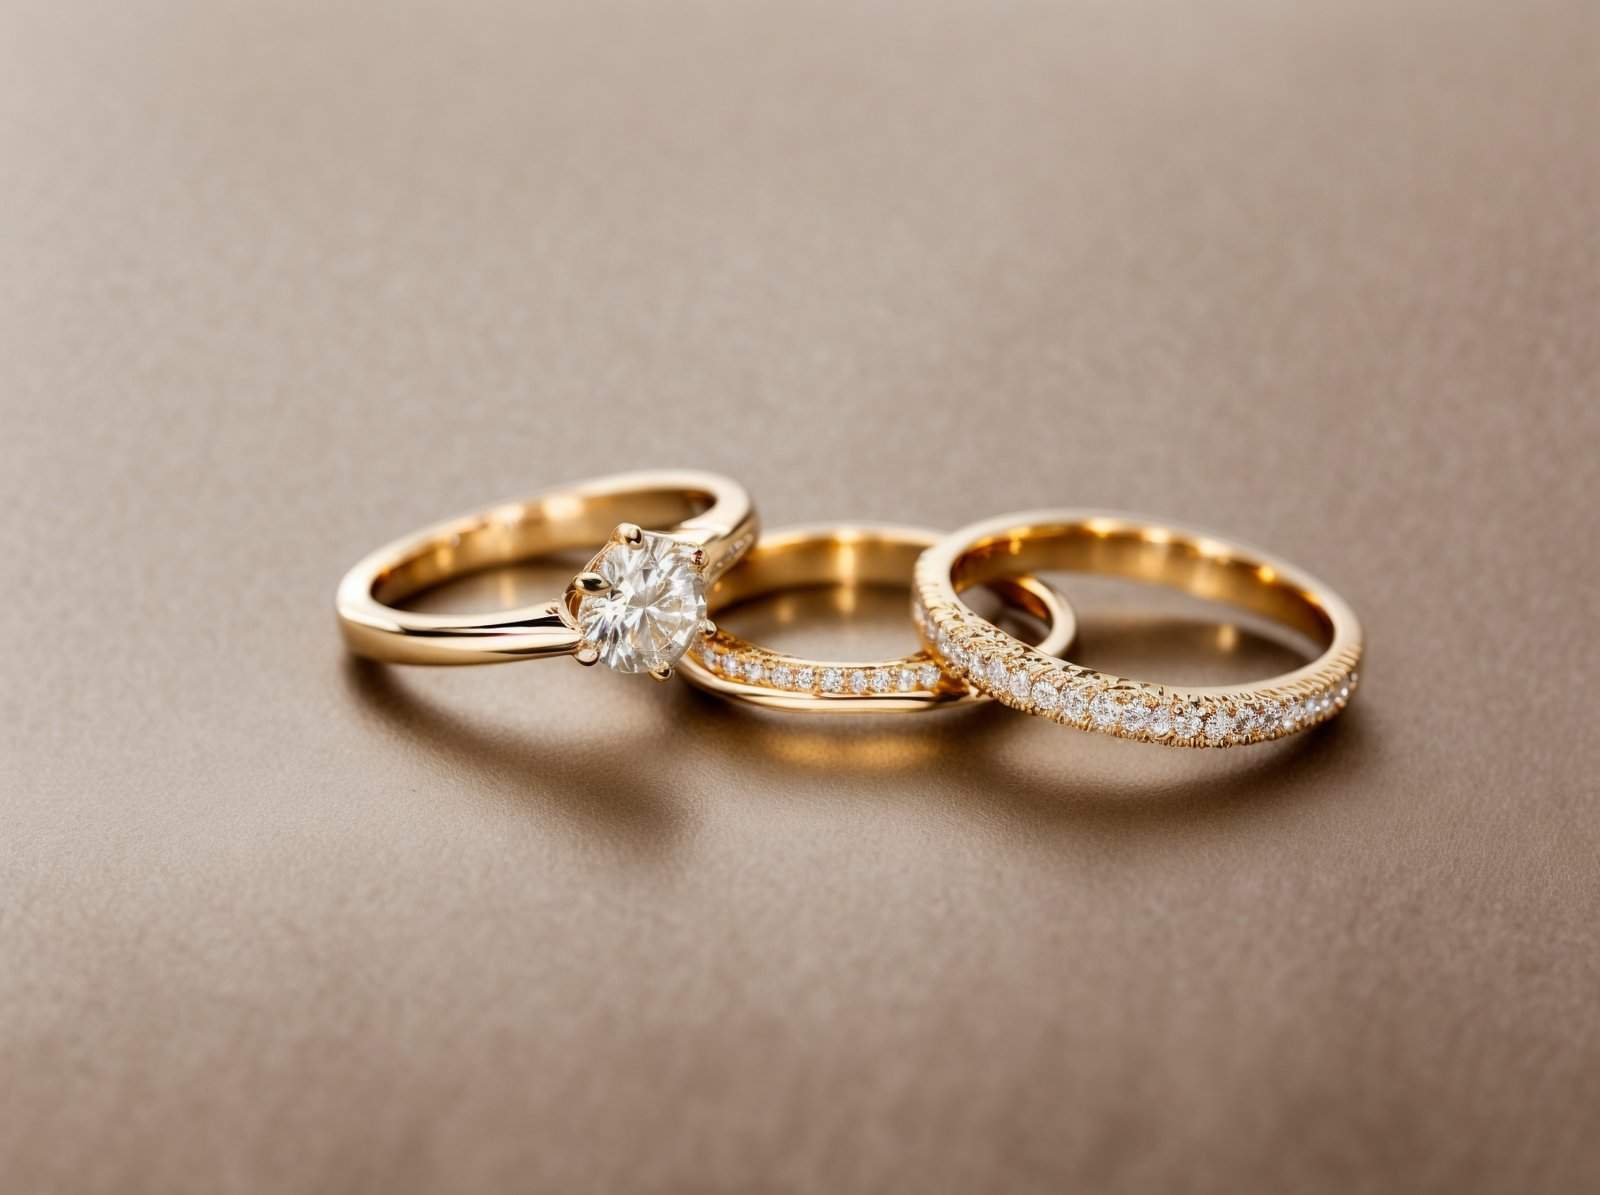 PhotoReal Engagement Rings Simple And Elegant With Simple Gold 2 1 